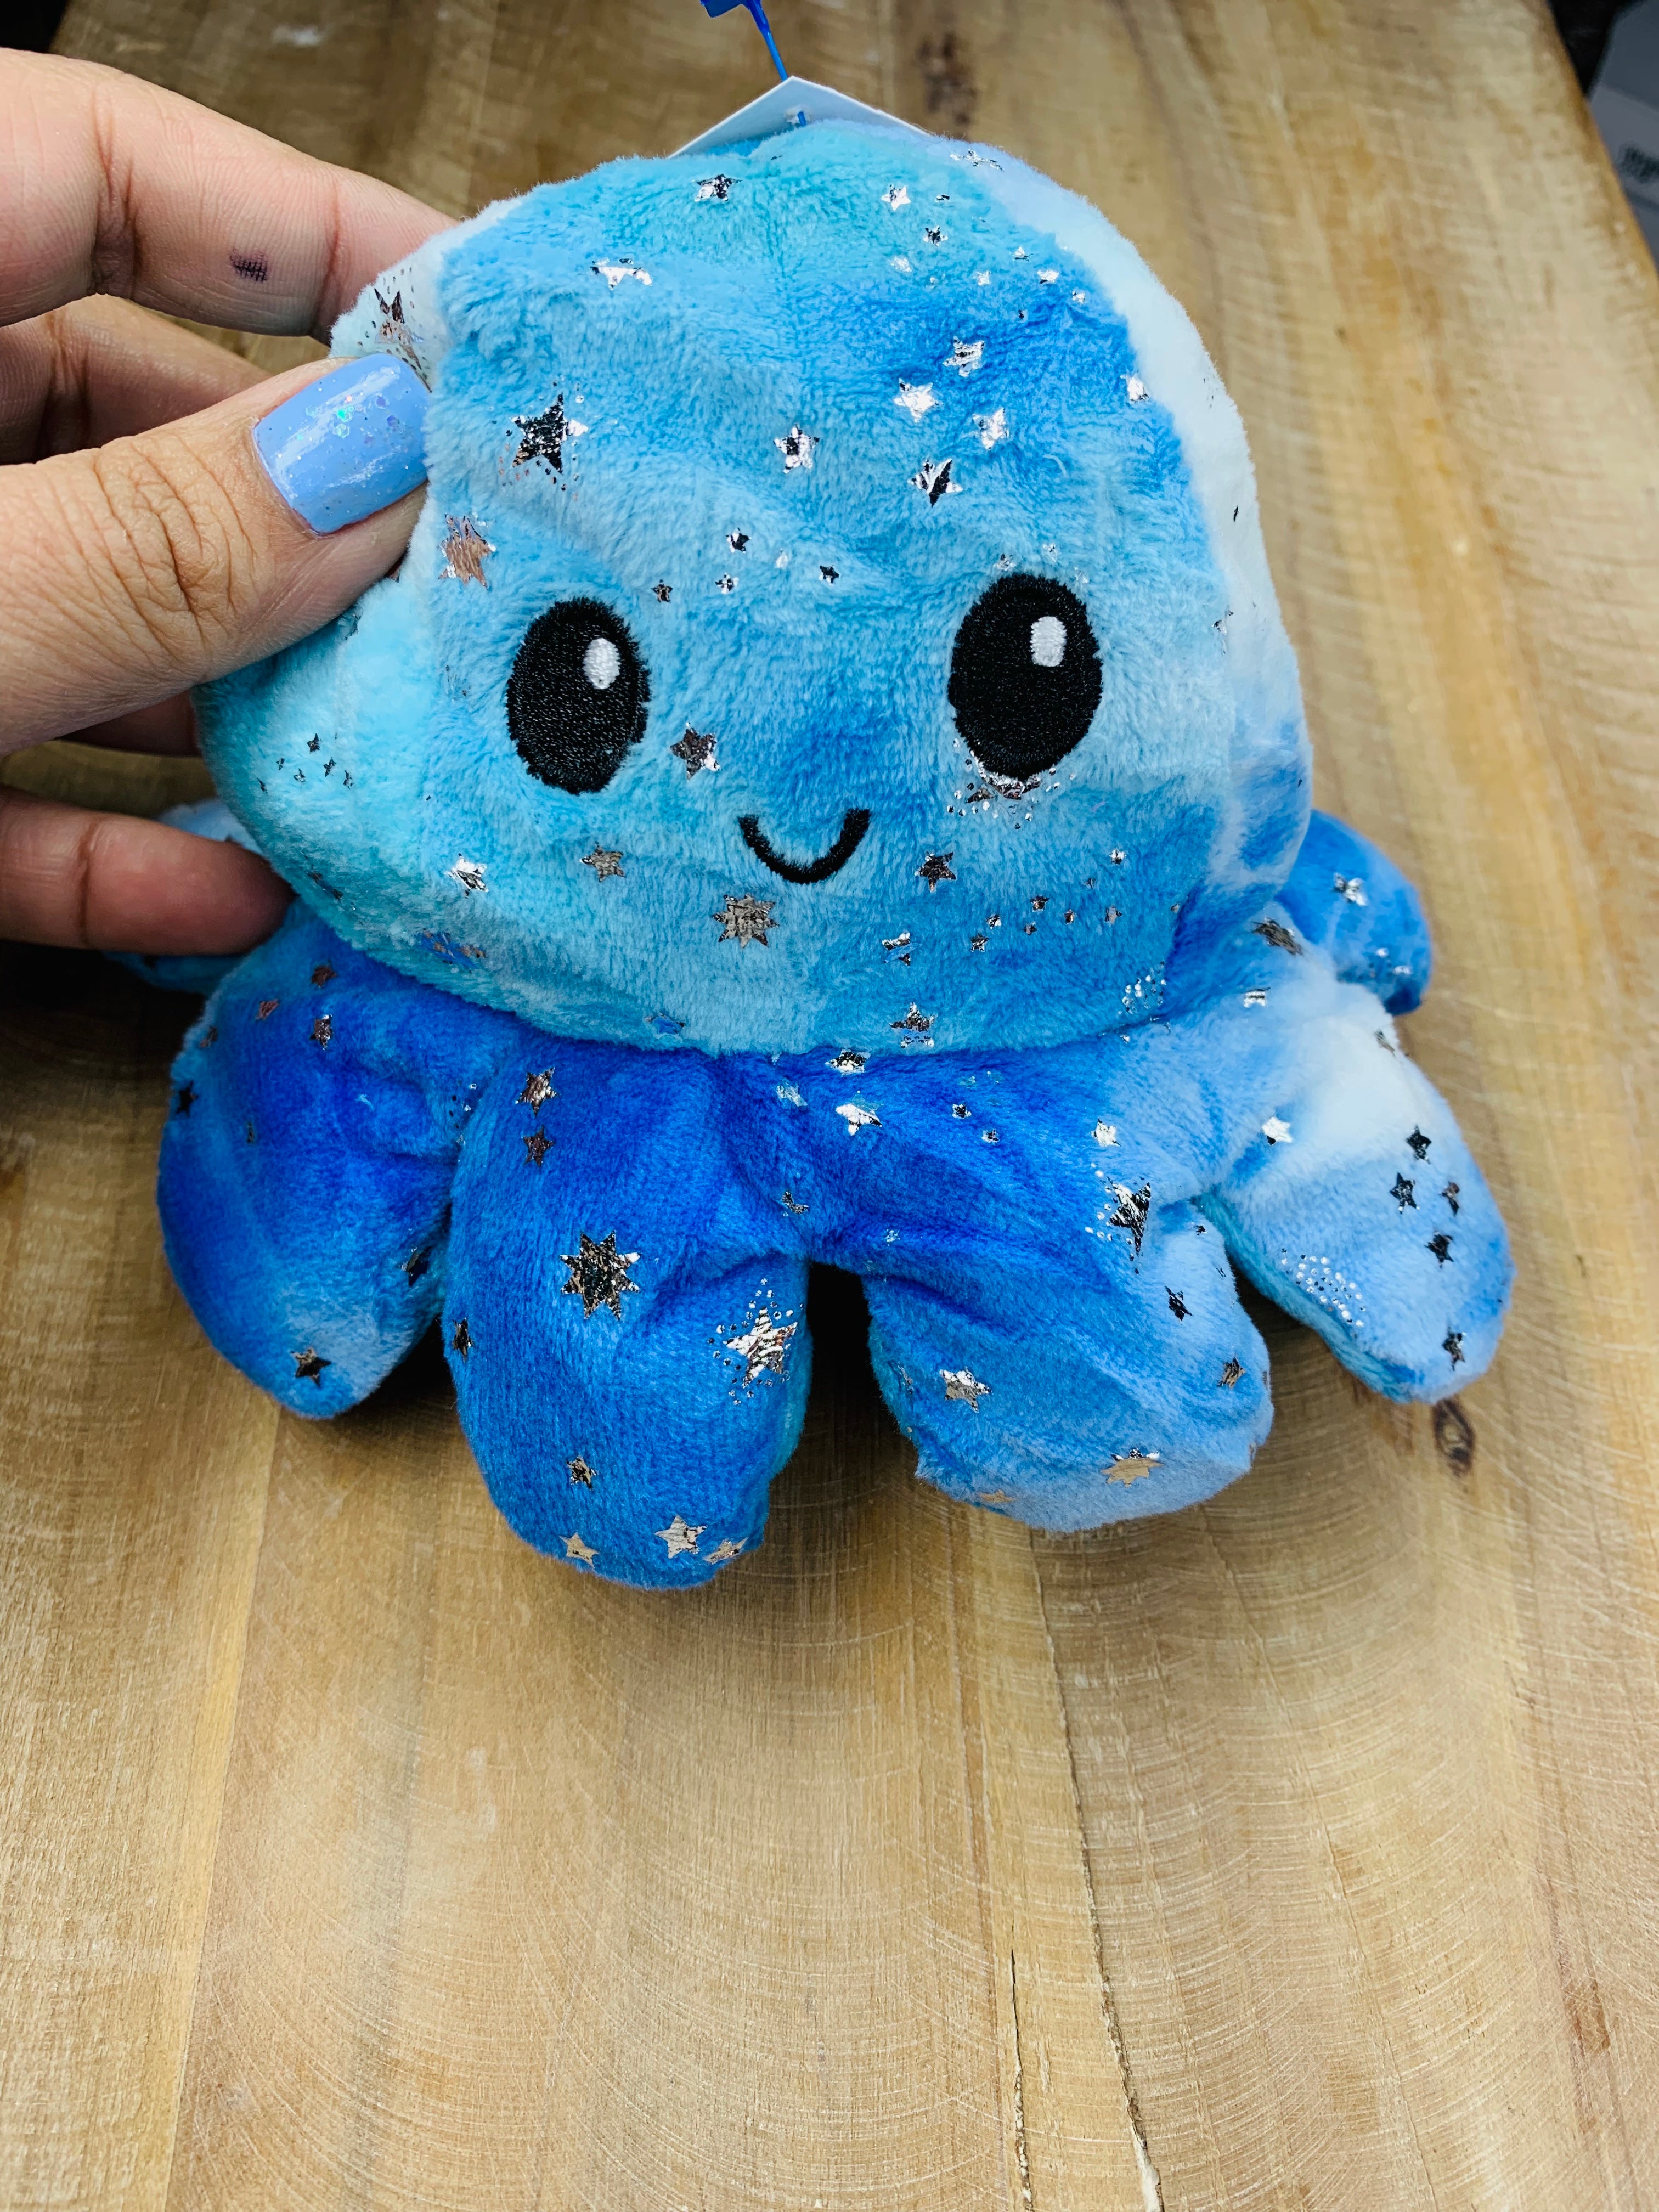 Blue & Teal Starry Night Small Reversible Emotions Octopus